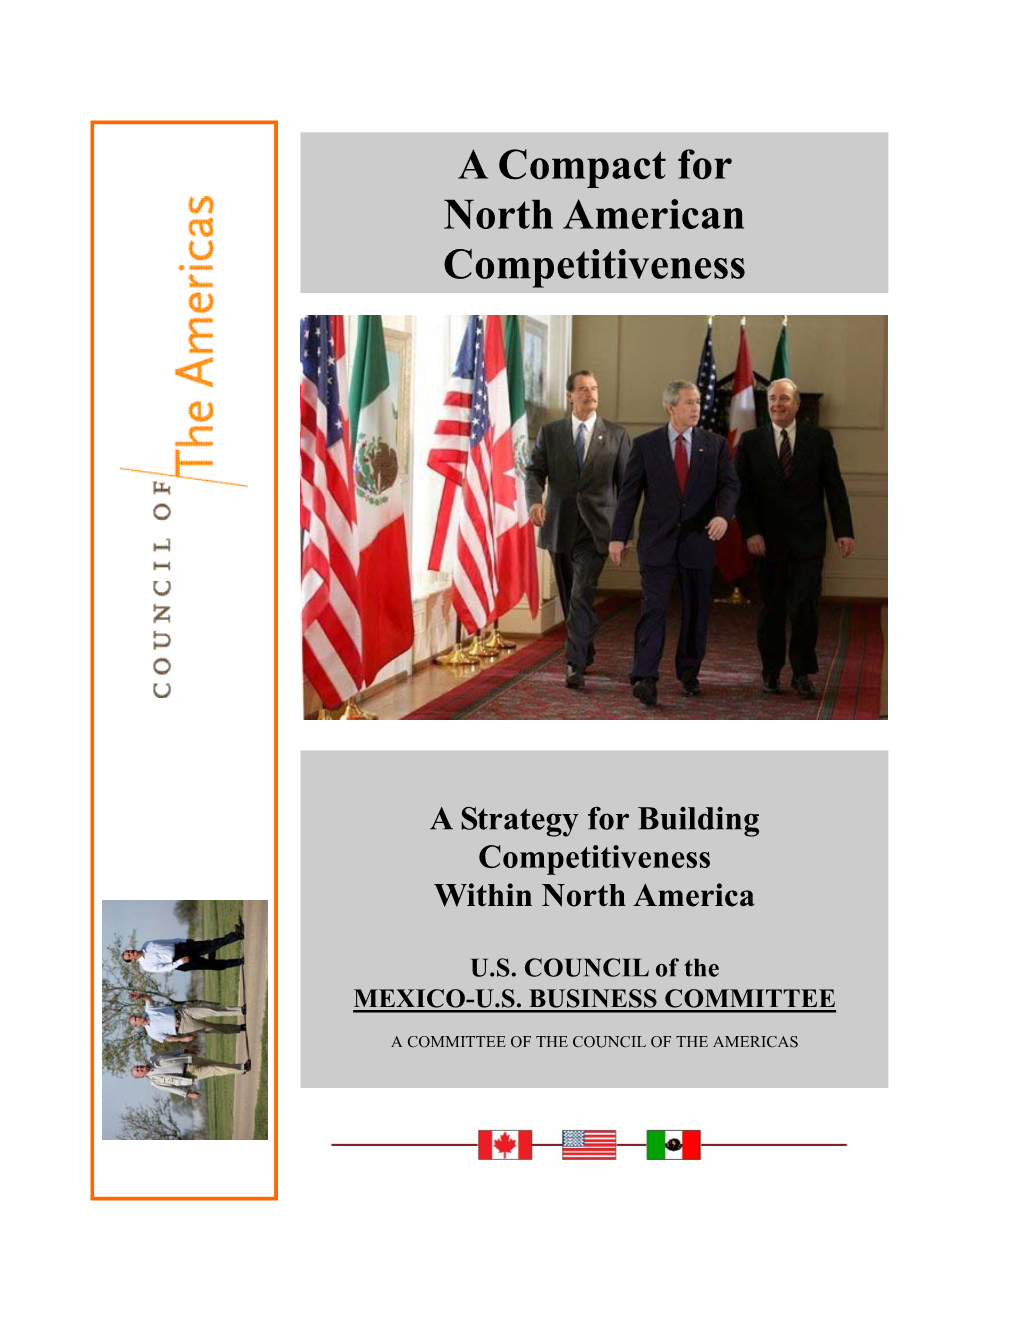 A Compact for North American Competitiveness